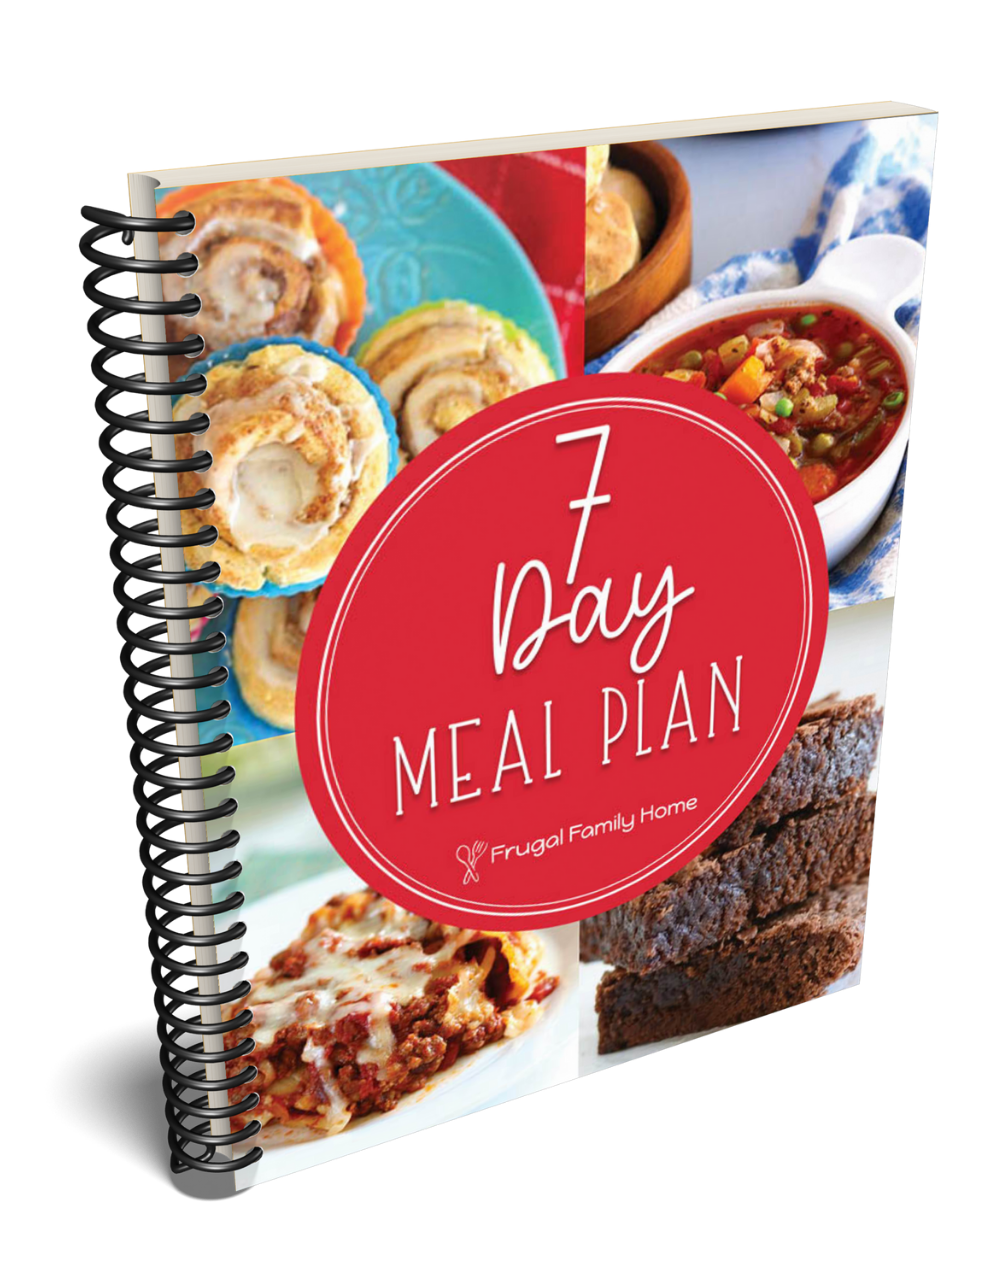 7 Day Meal Plan, Frugal Family Friendly Meal Plan